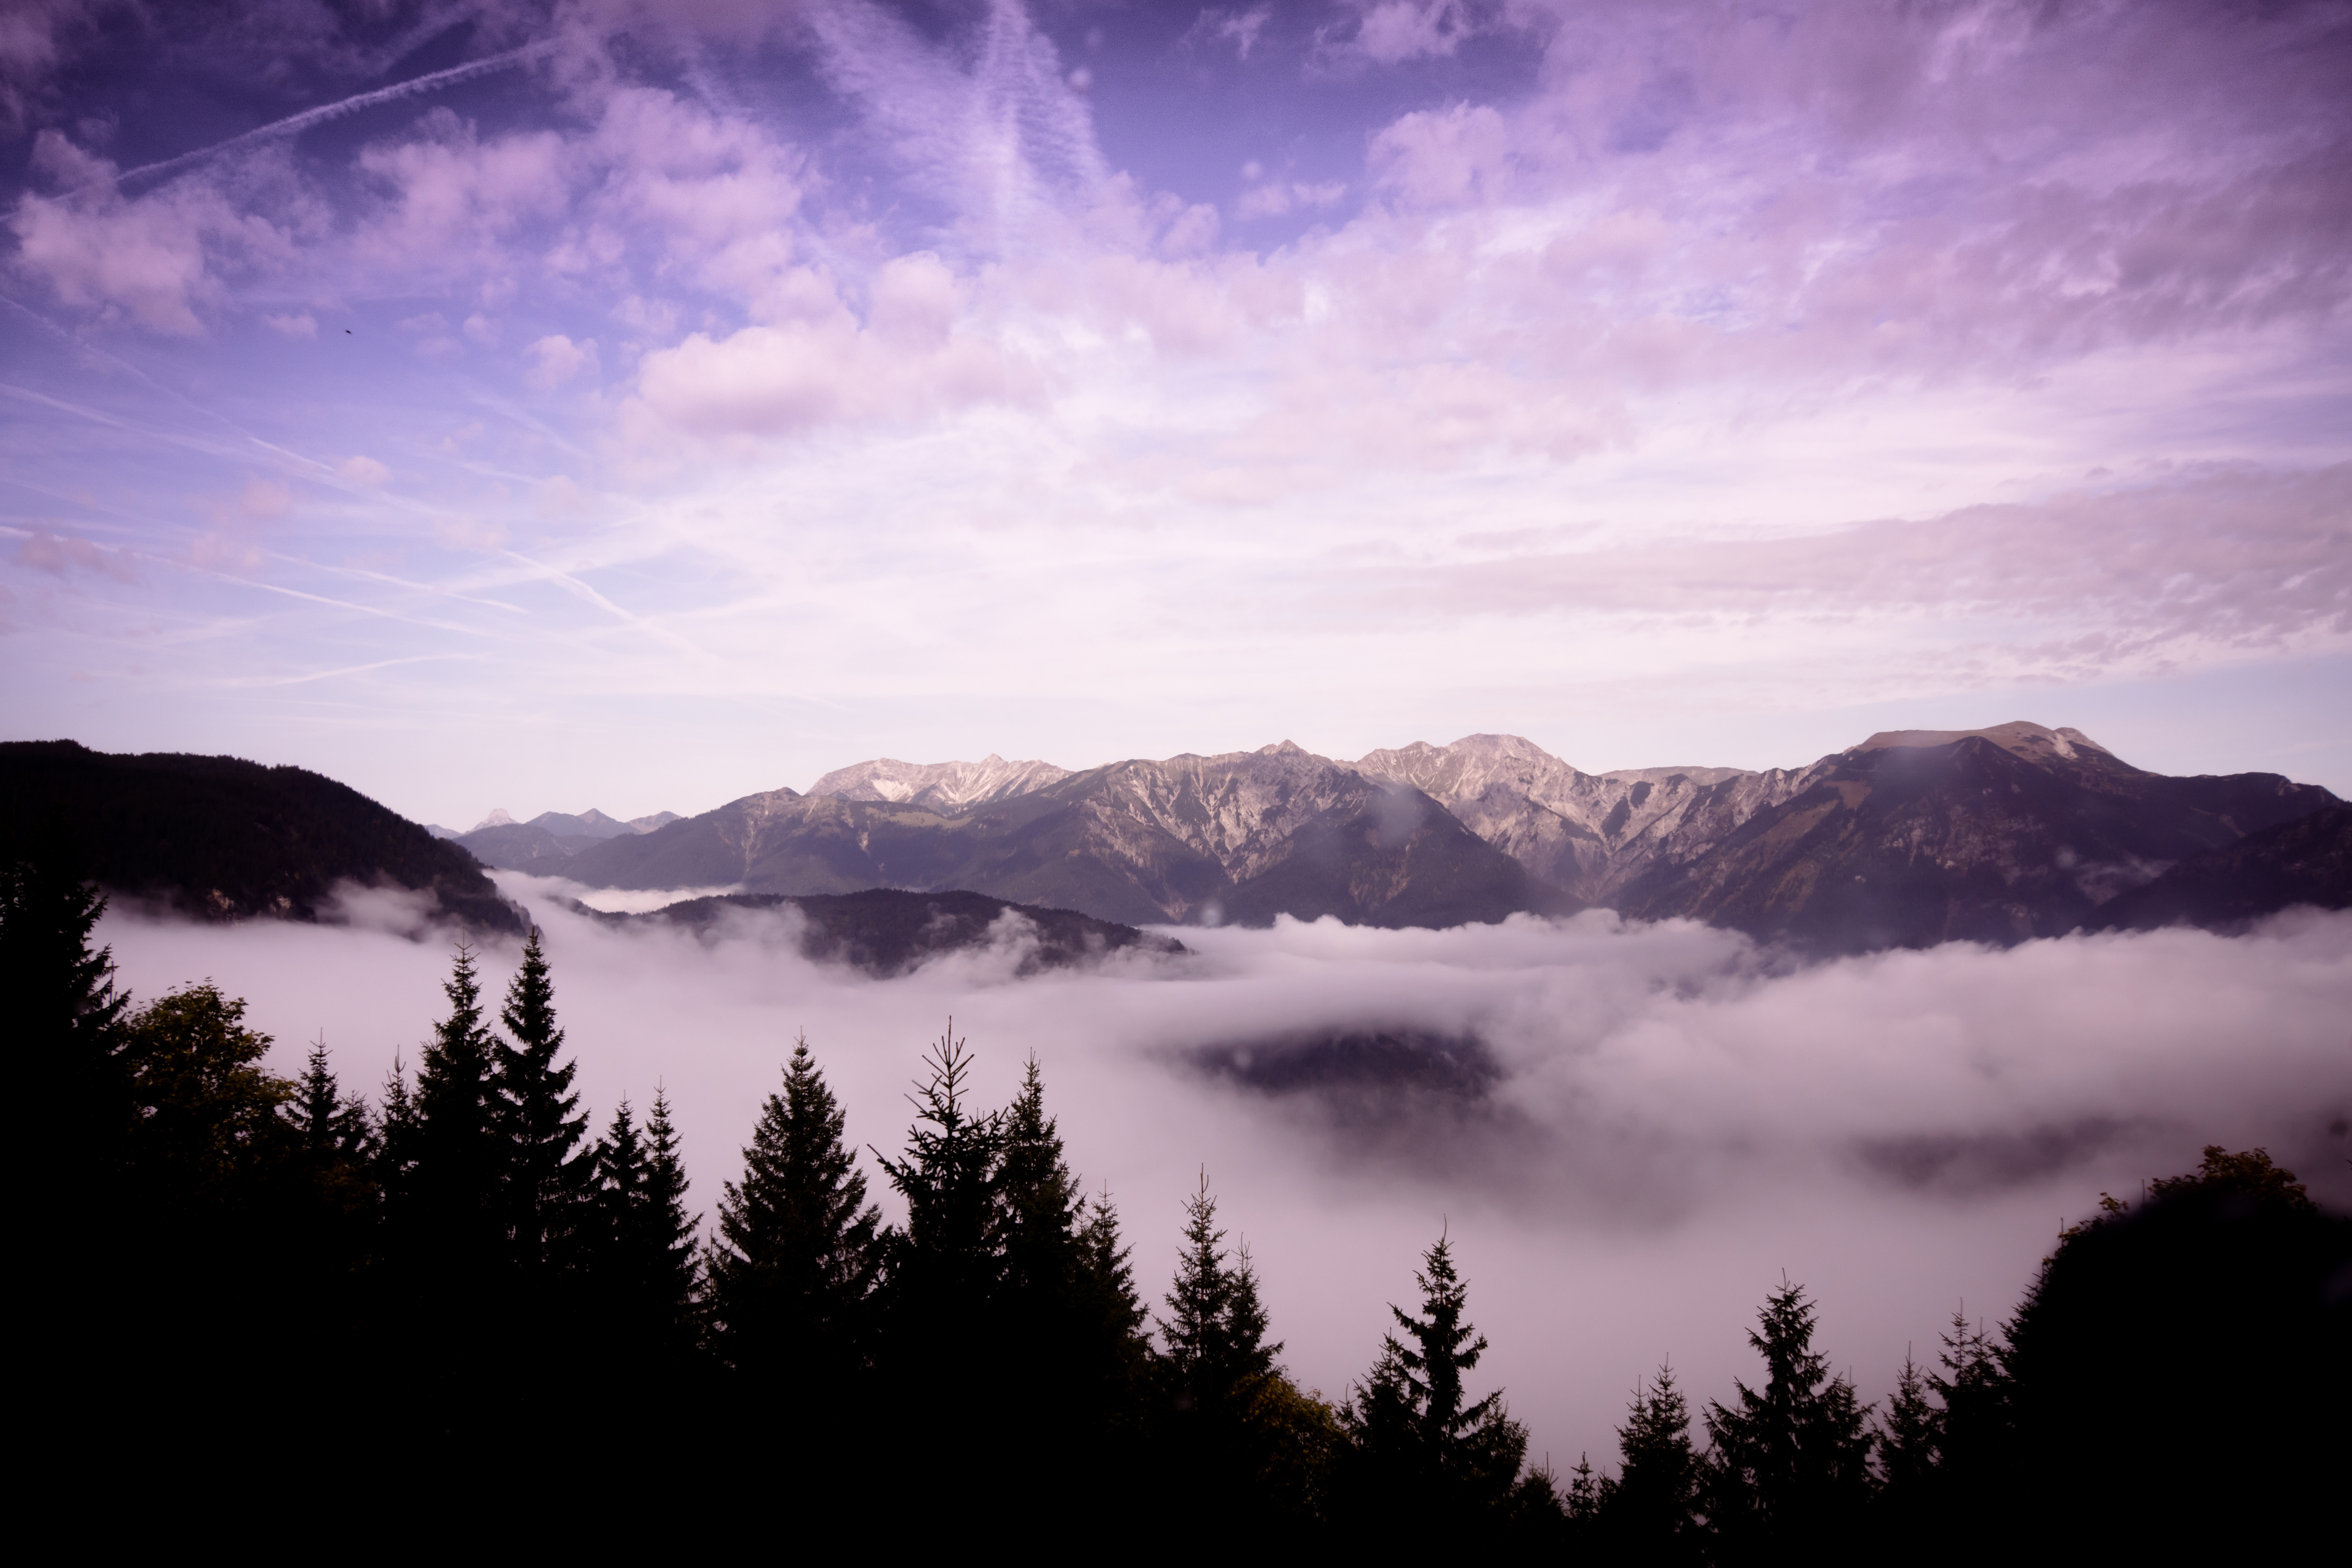 Wallpaper for mobile devices nature, clouds, trees, mountains